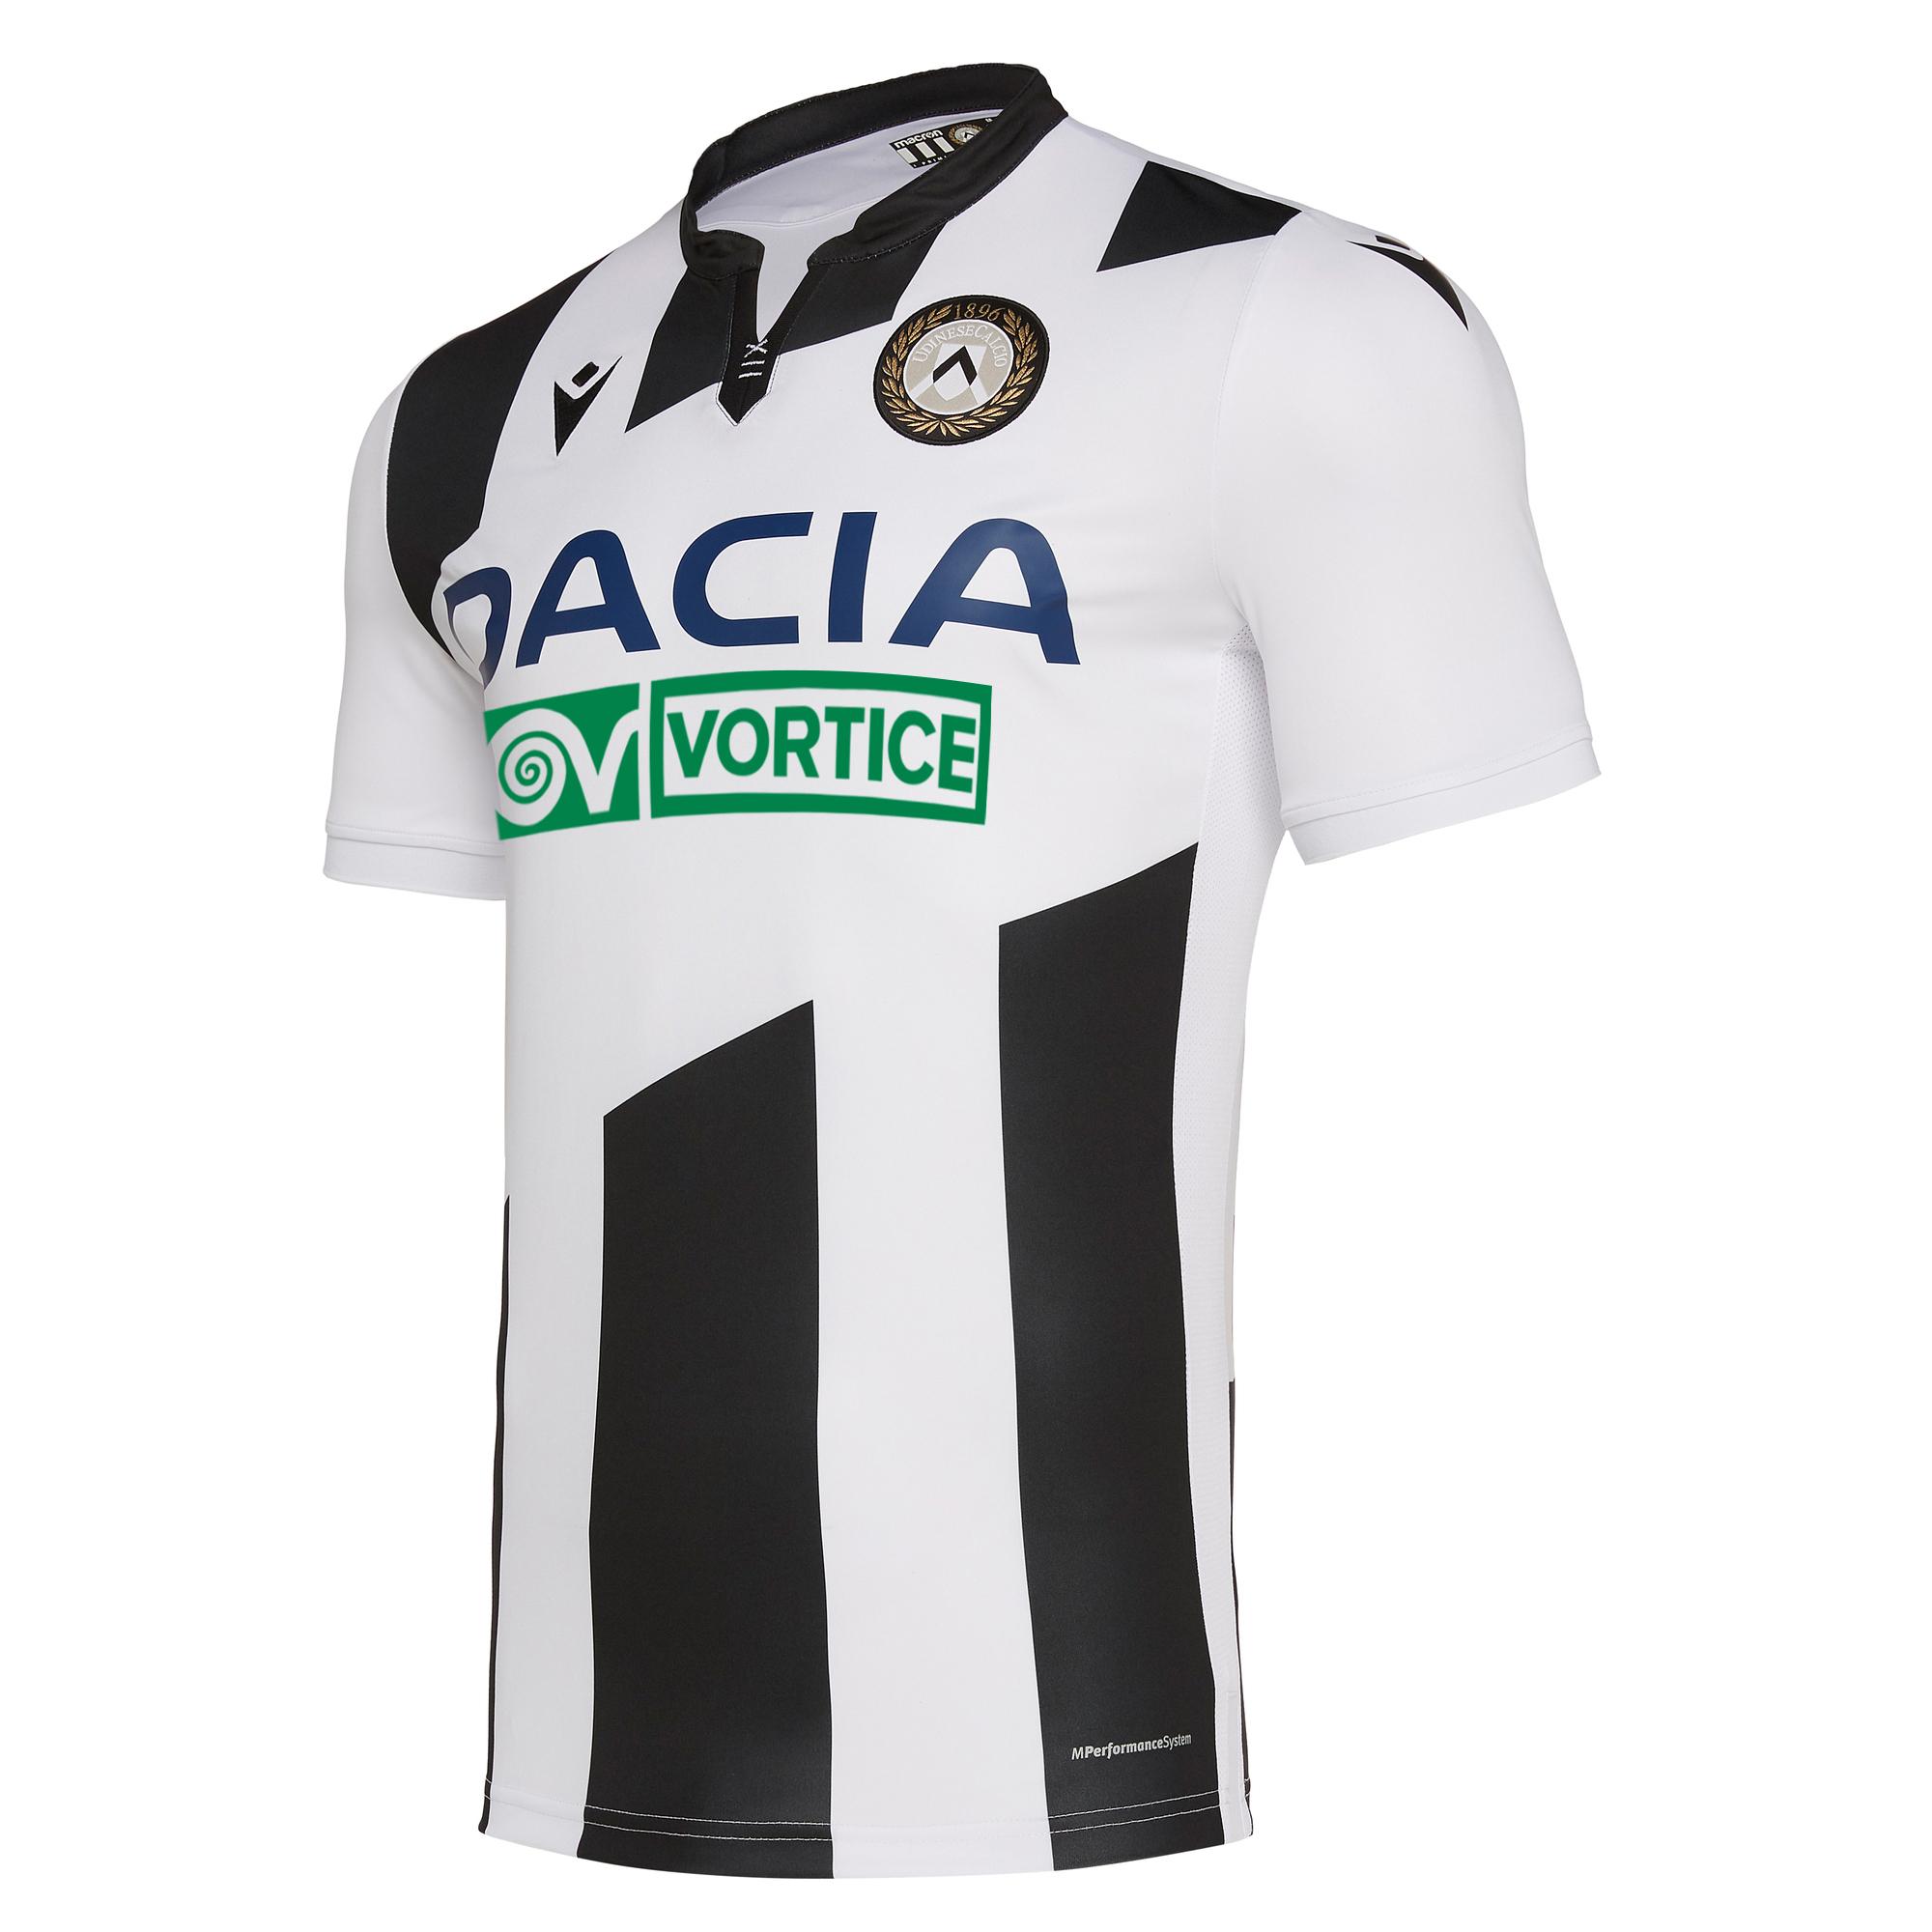 Macron Maillot De Match Home Udinese   19/20